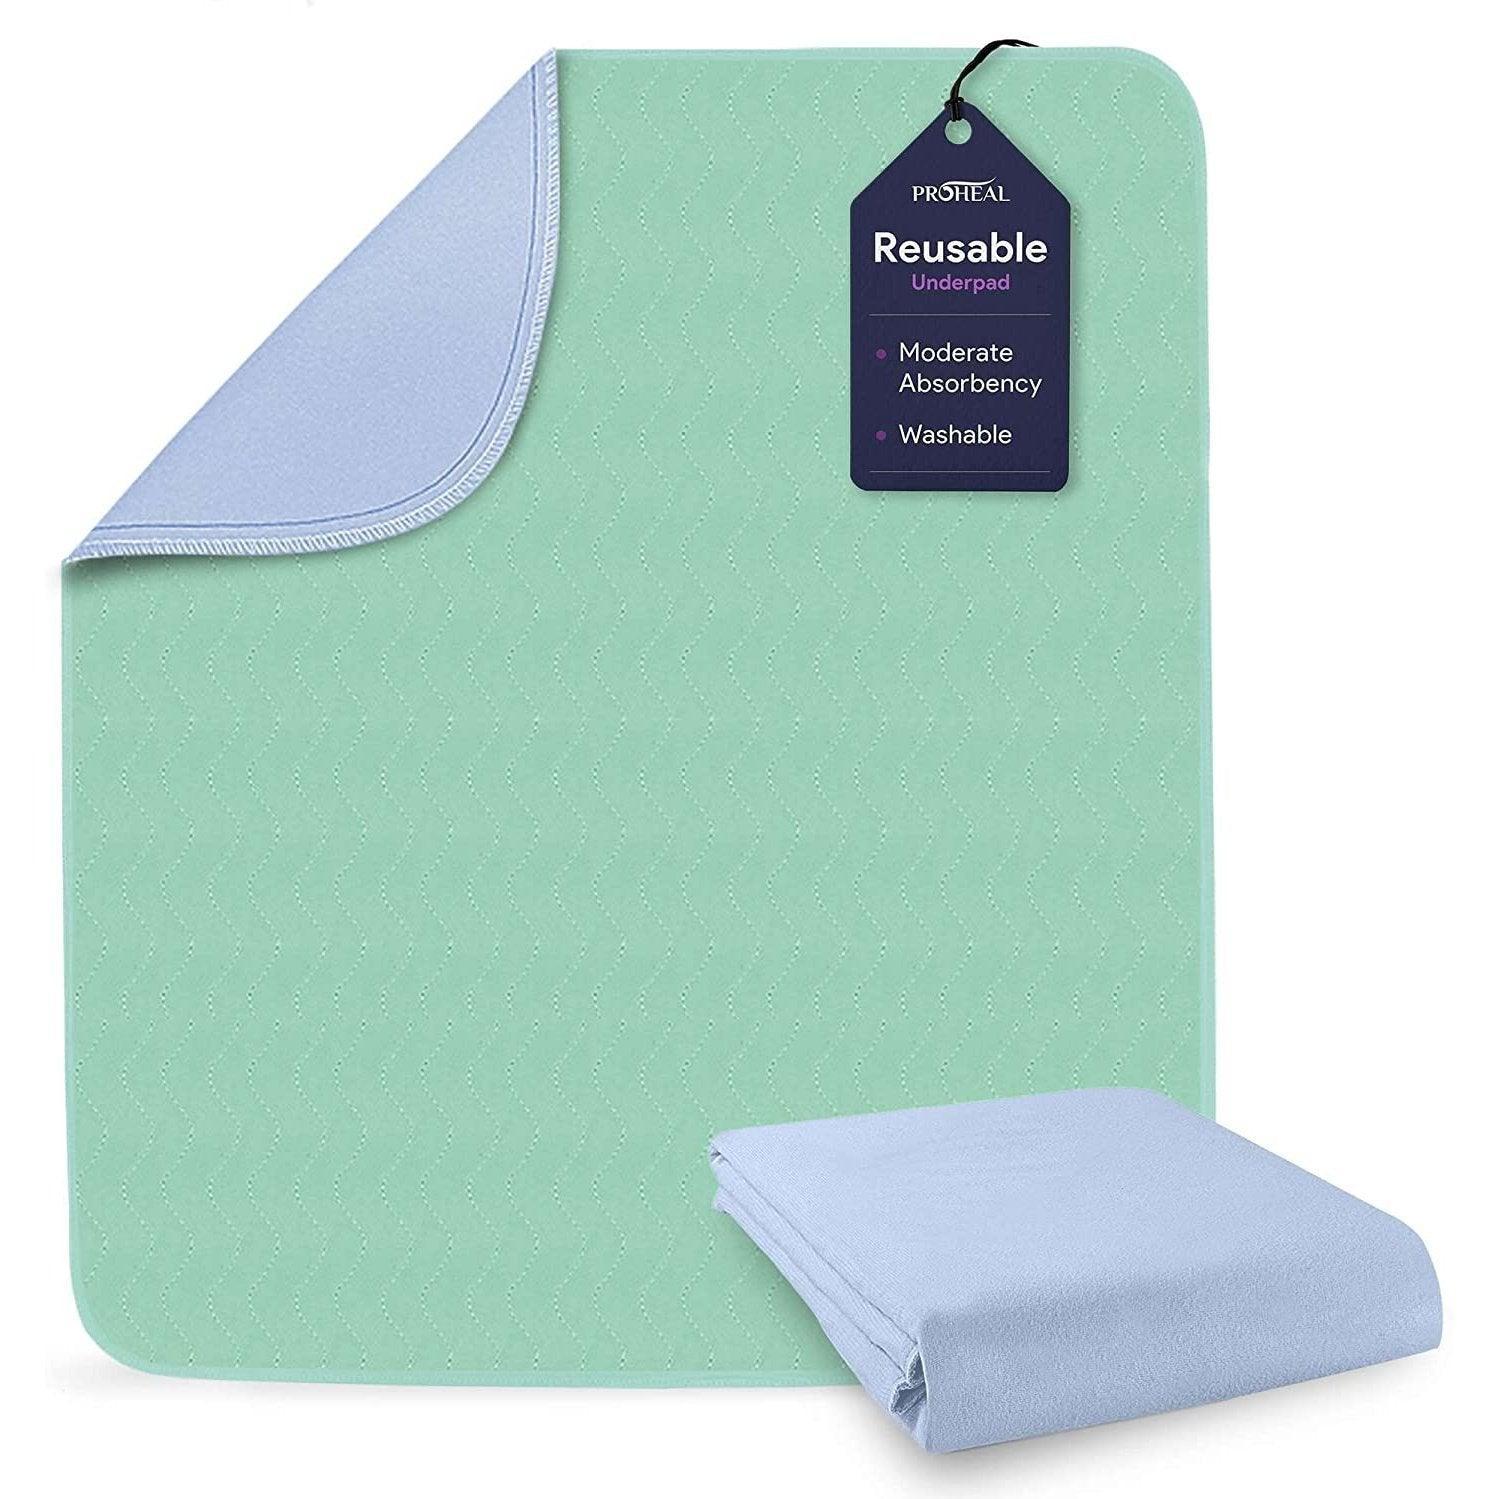 http://prohealproducts.com/cdn/shop/files/washable-bed-pads-quick-dry-poly-laminated-reusable-chucks-34x36-proheal-products-1.jpg?v=1689335503